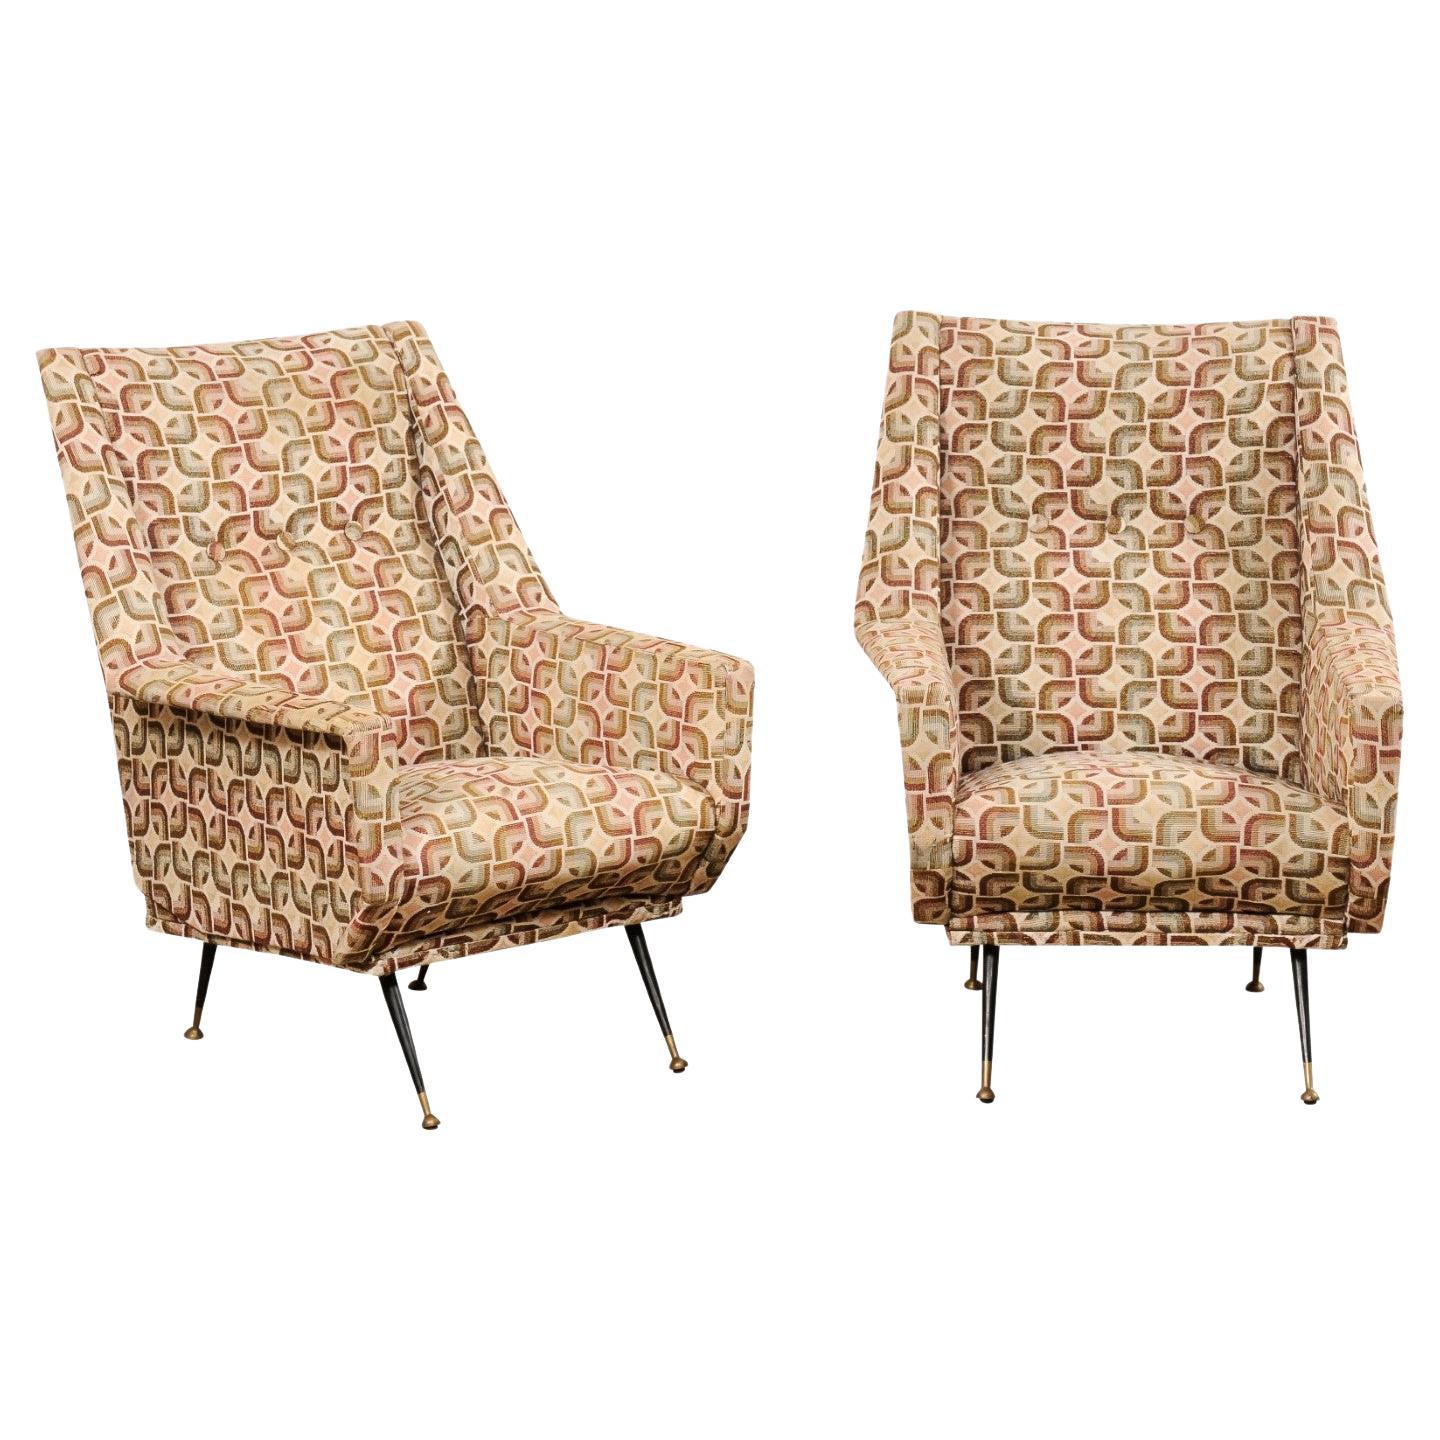 Midcentury Pair of Italian Modern-Design Wingback Chairs For Sale